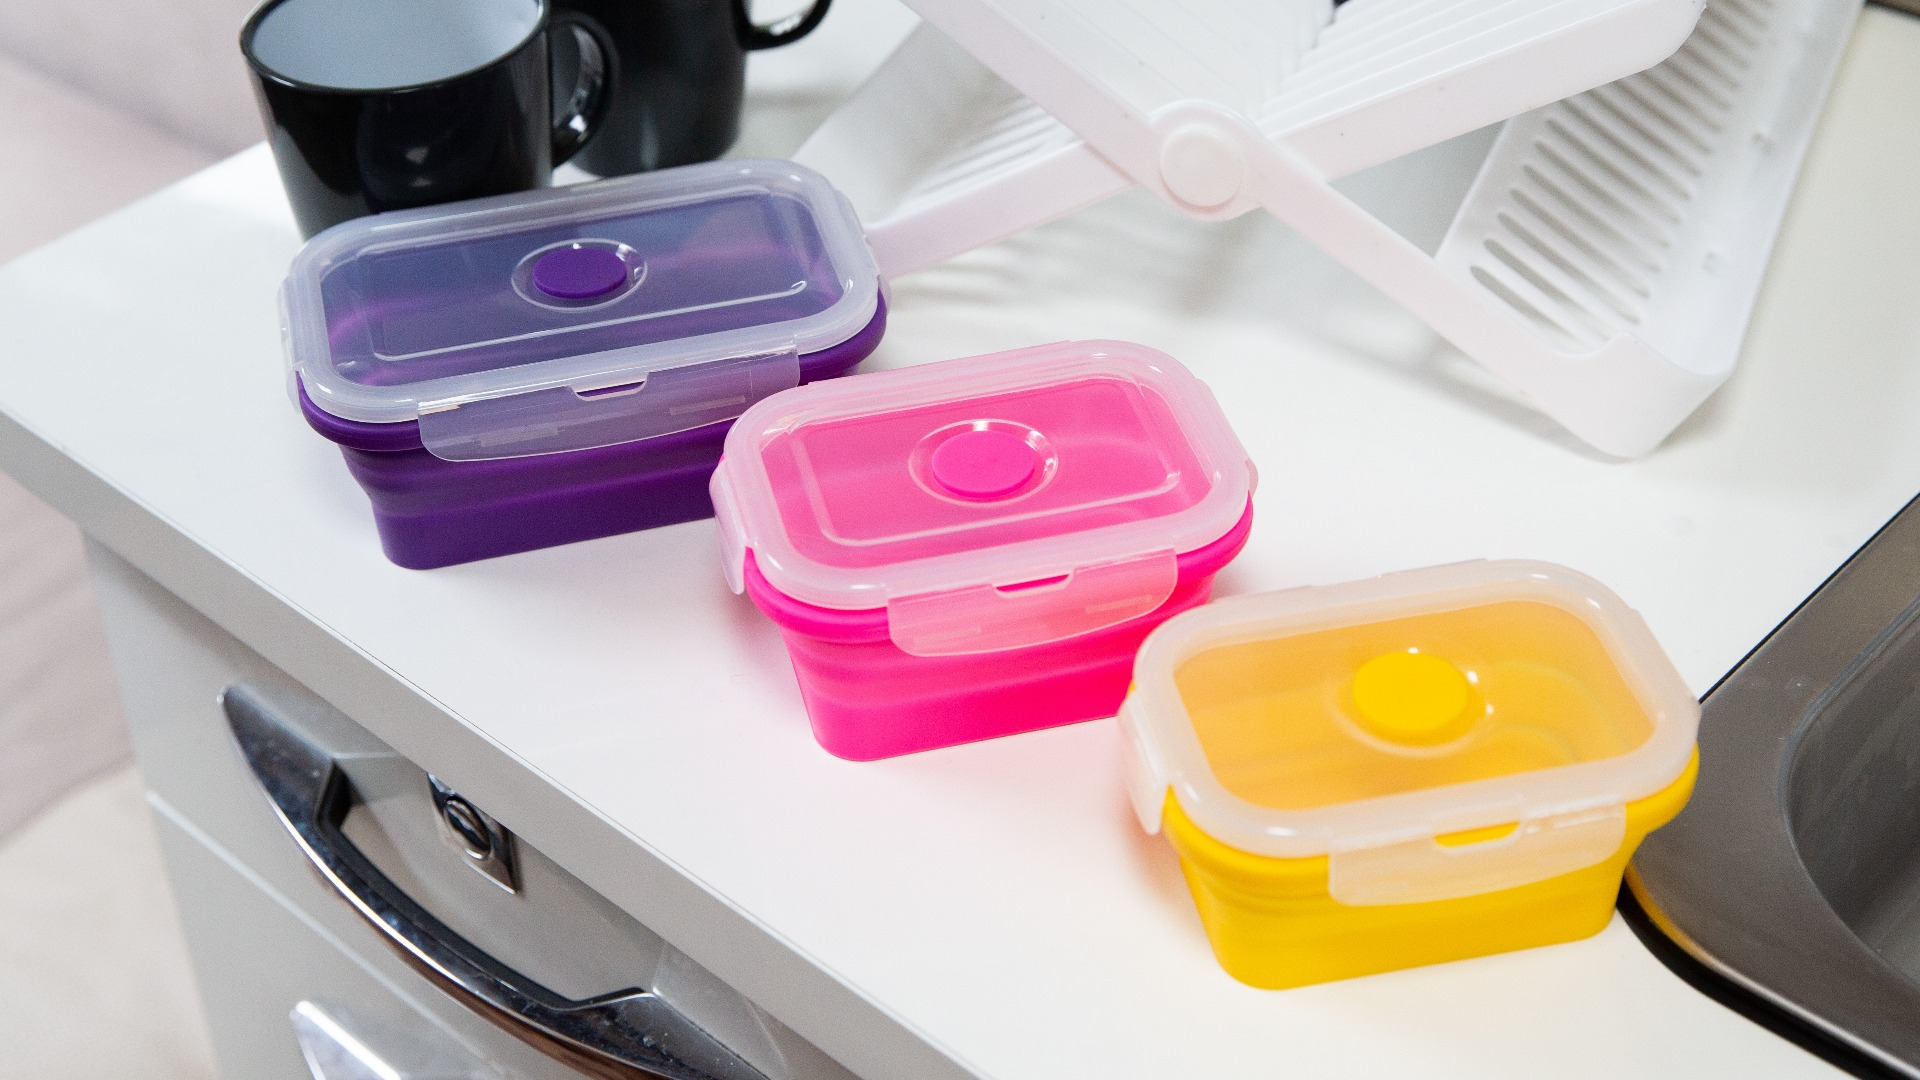 Collapsible containers help save space